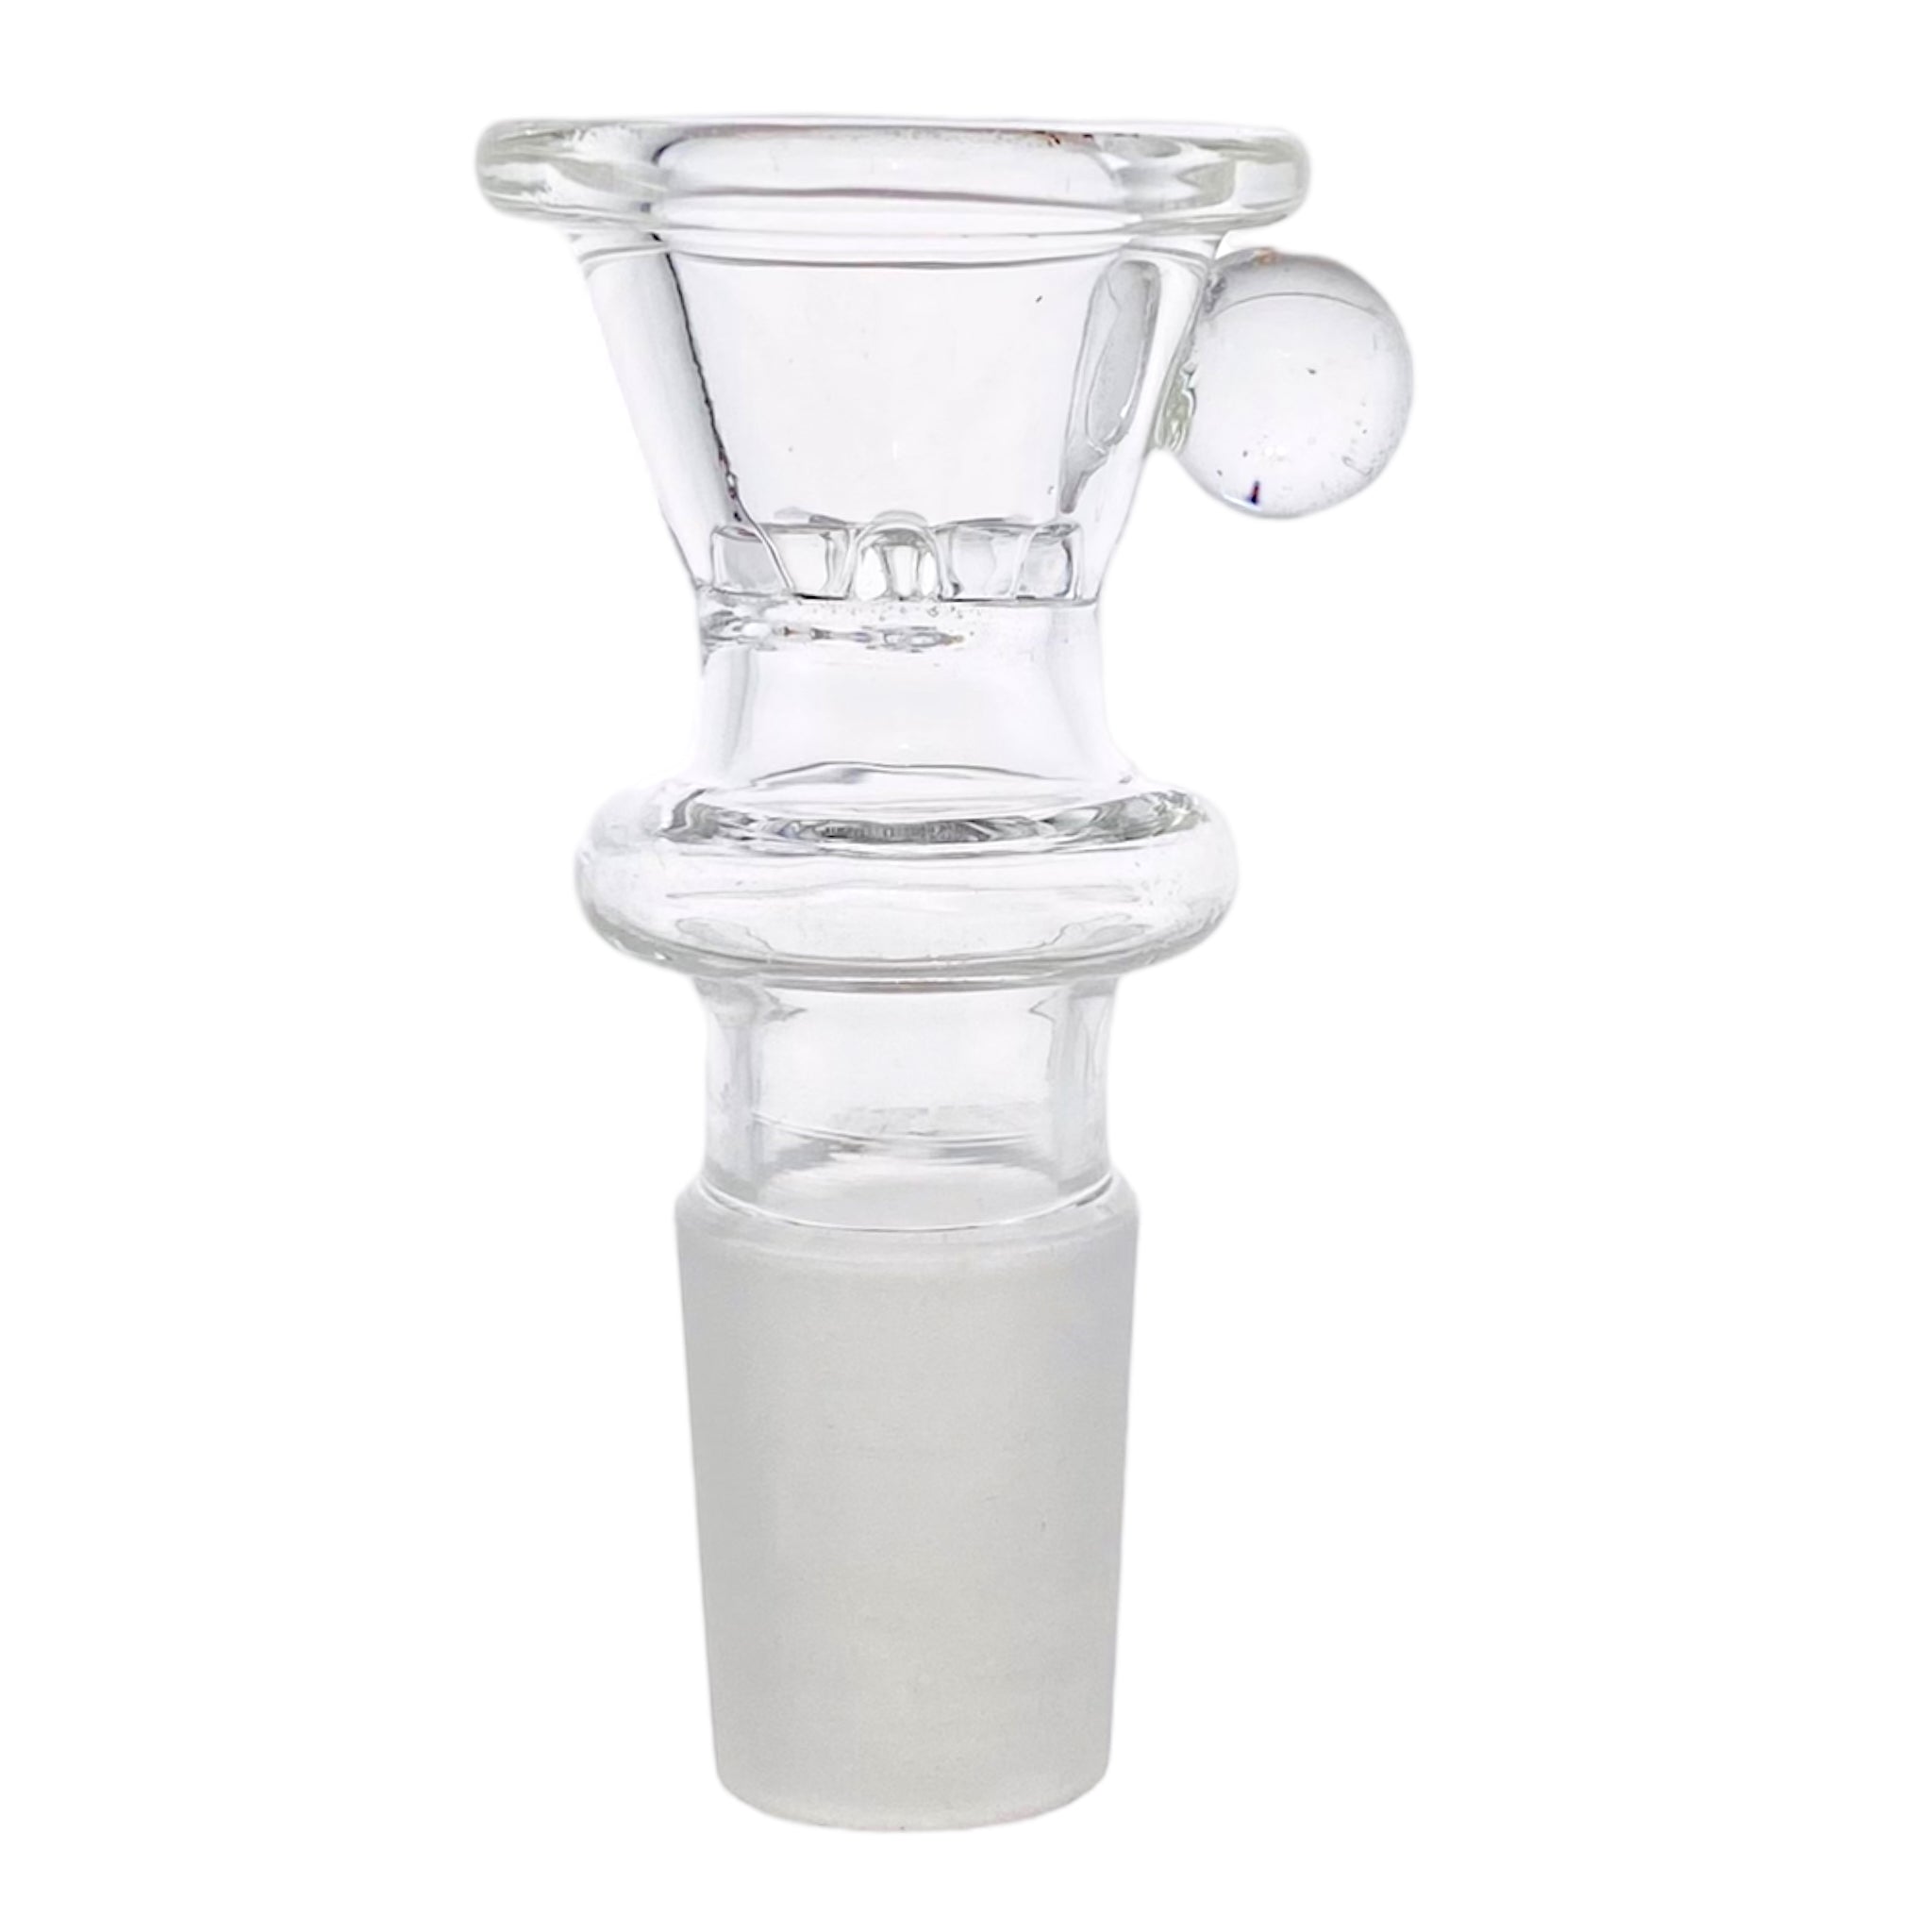 18mm Flower Bowl - Large Martini Funnel Bong Bowl Piece With Built In Screen - Clear